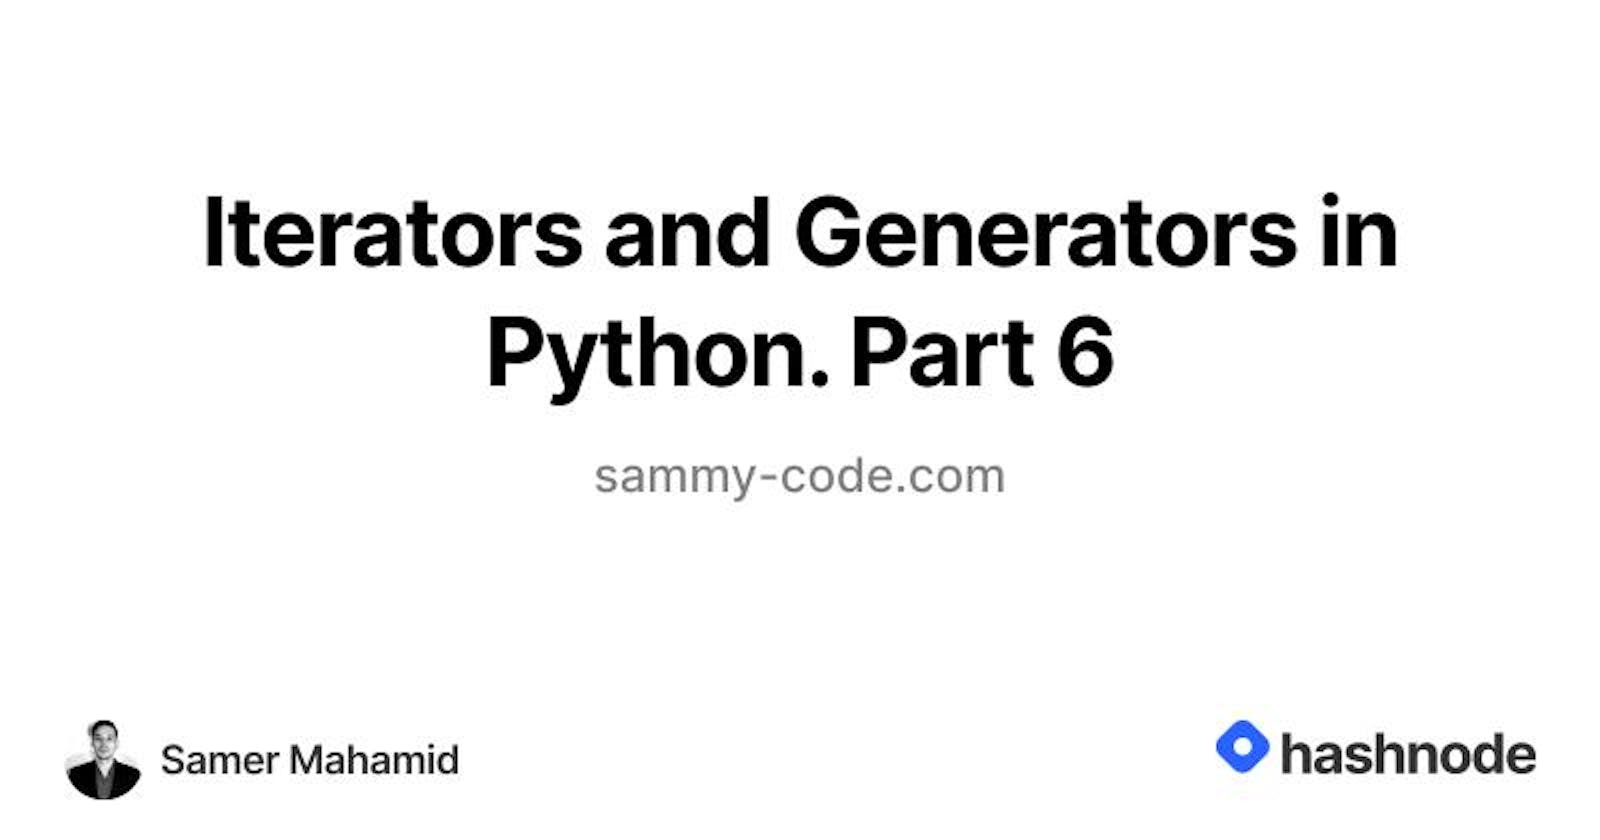 Iterators and Generators in Python. Part 6